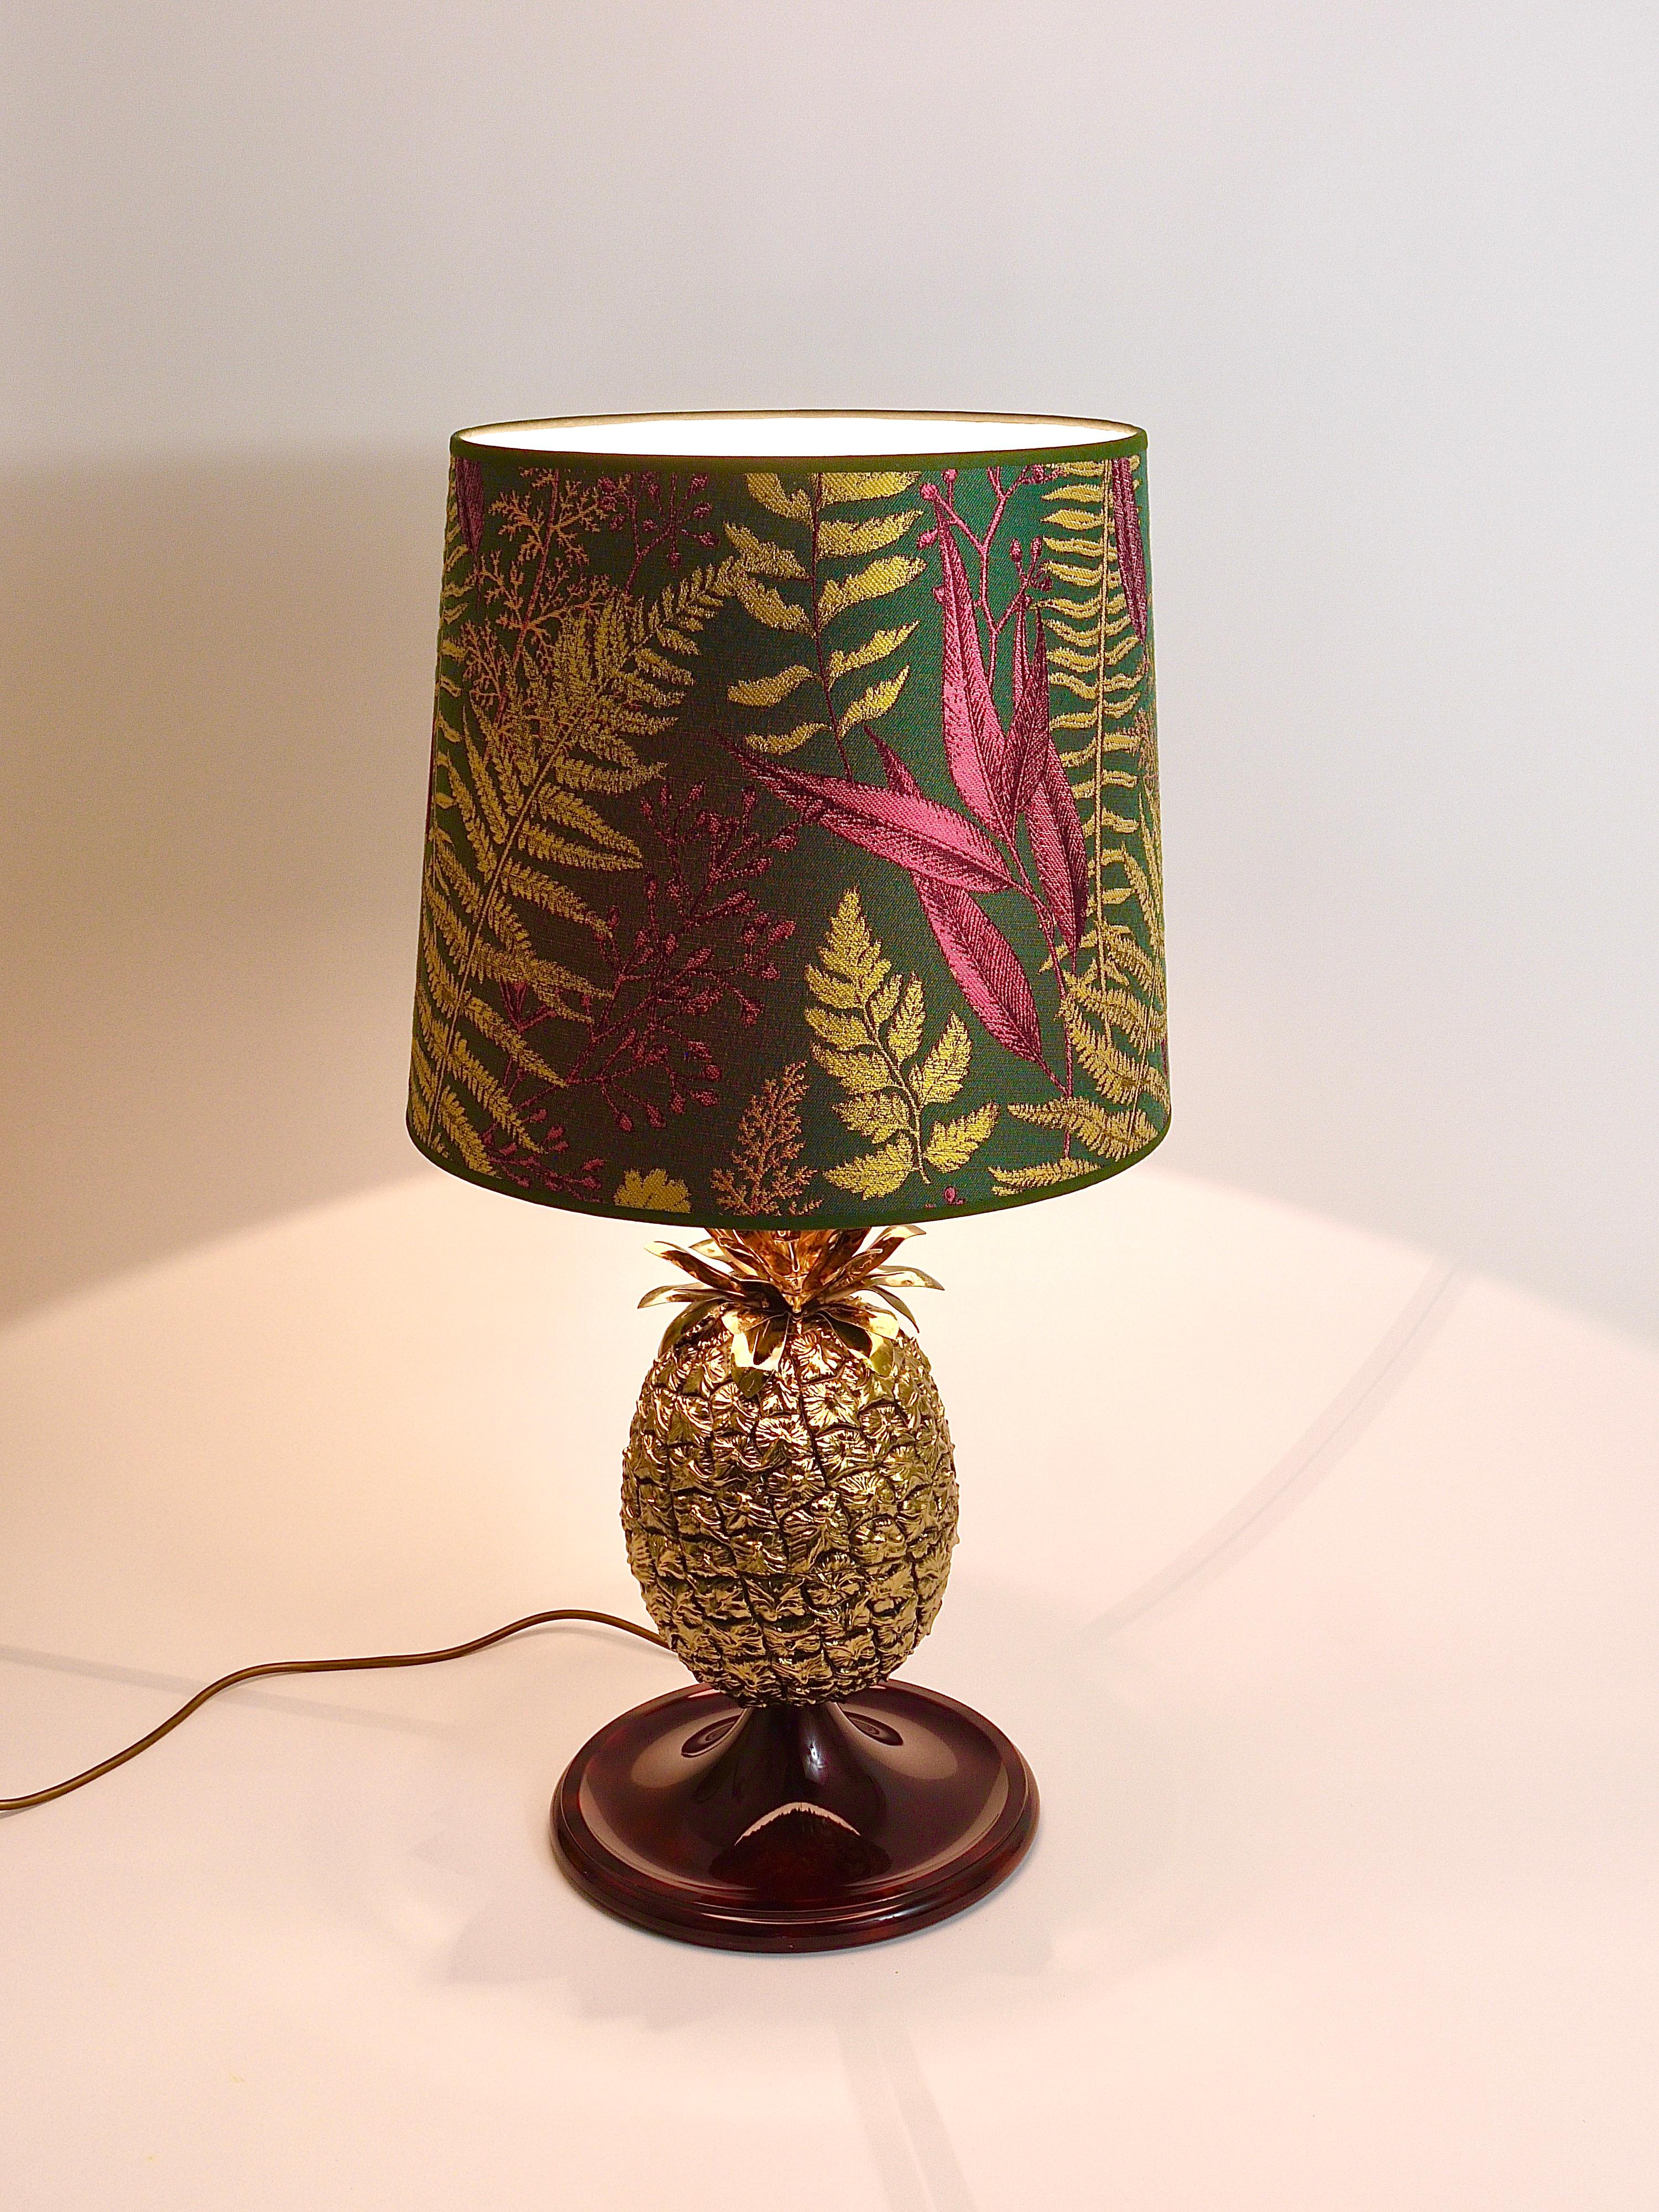 Mauro Manetti Hollywood Regency Pineapple Brass Table Lamp, Italy, 1970s For Sale 1